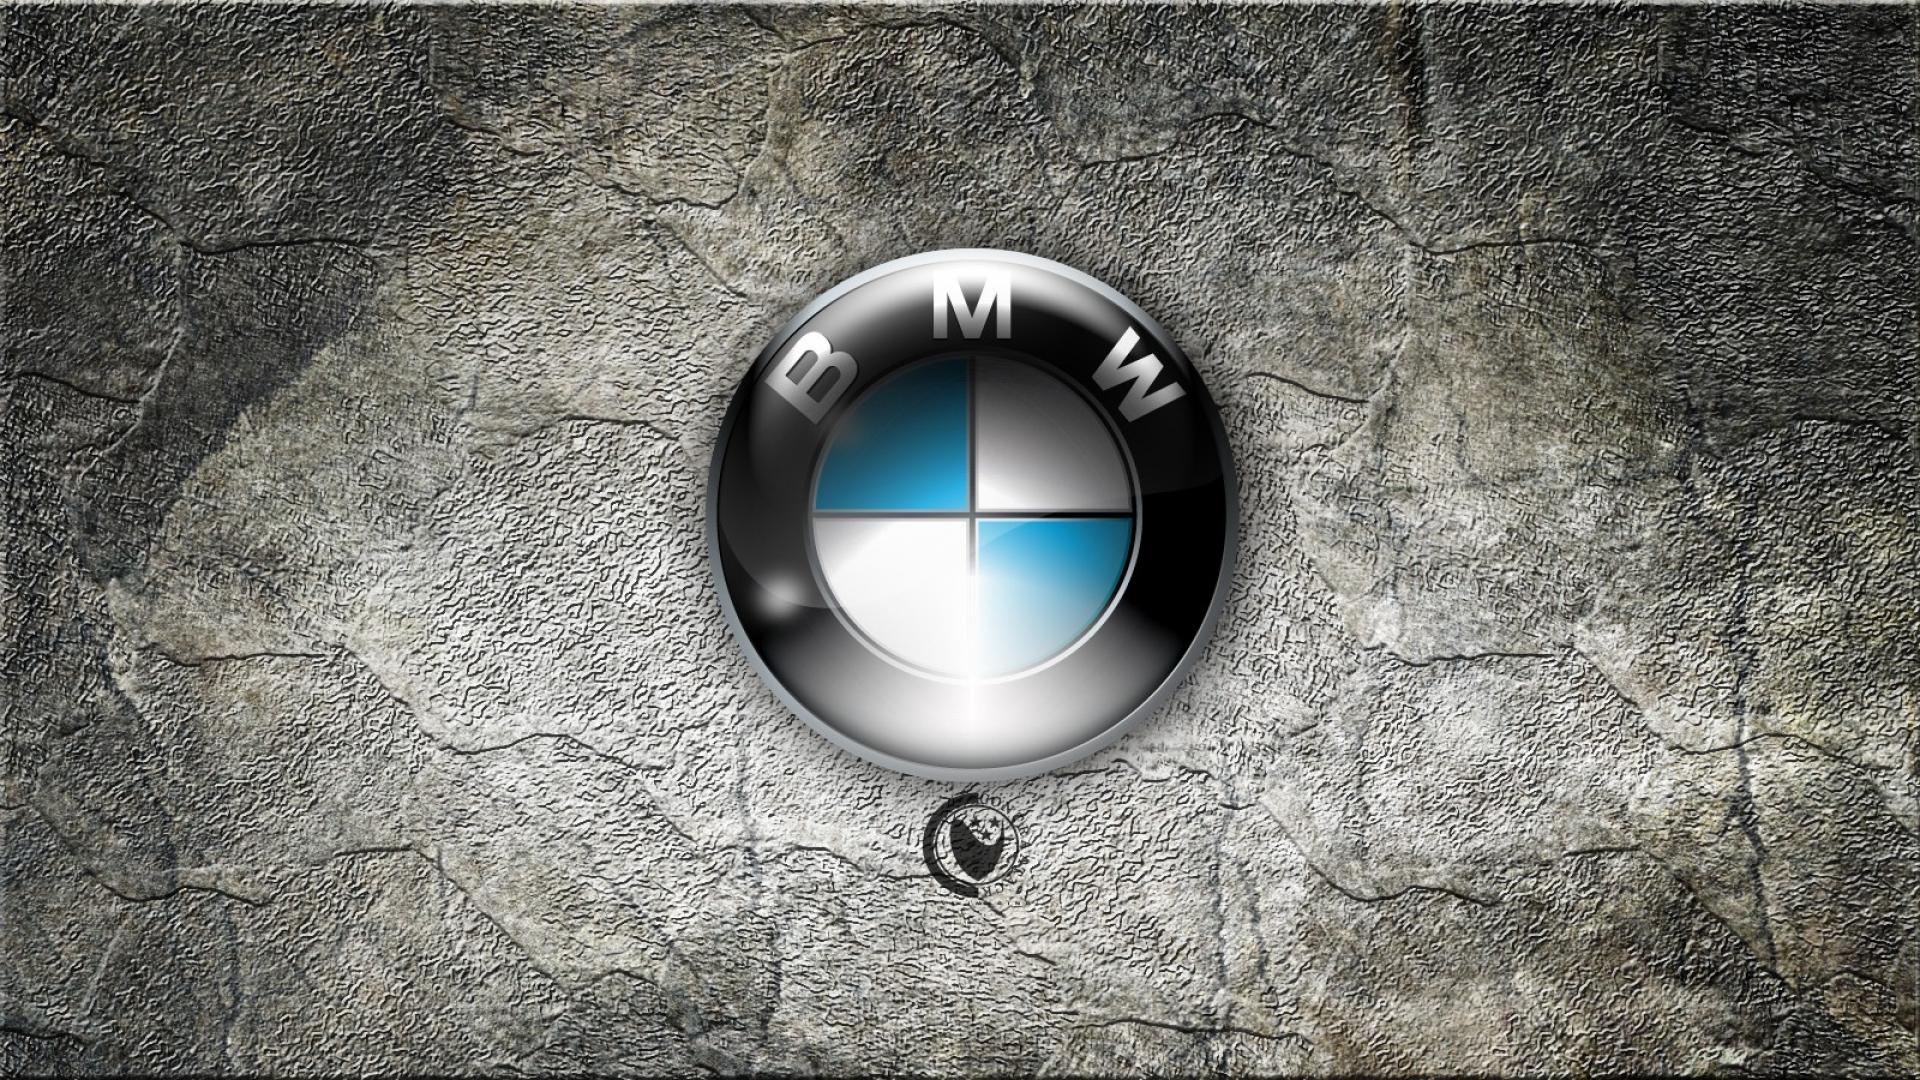 BMW Car Brand Logo HD Wallpapers for all resolution Free HD 1920x1080